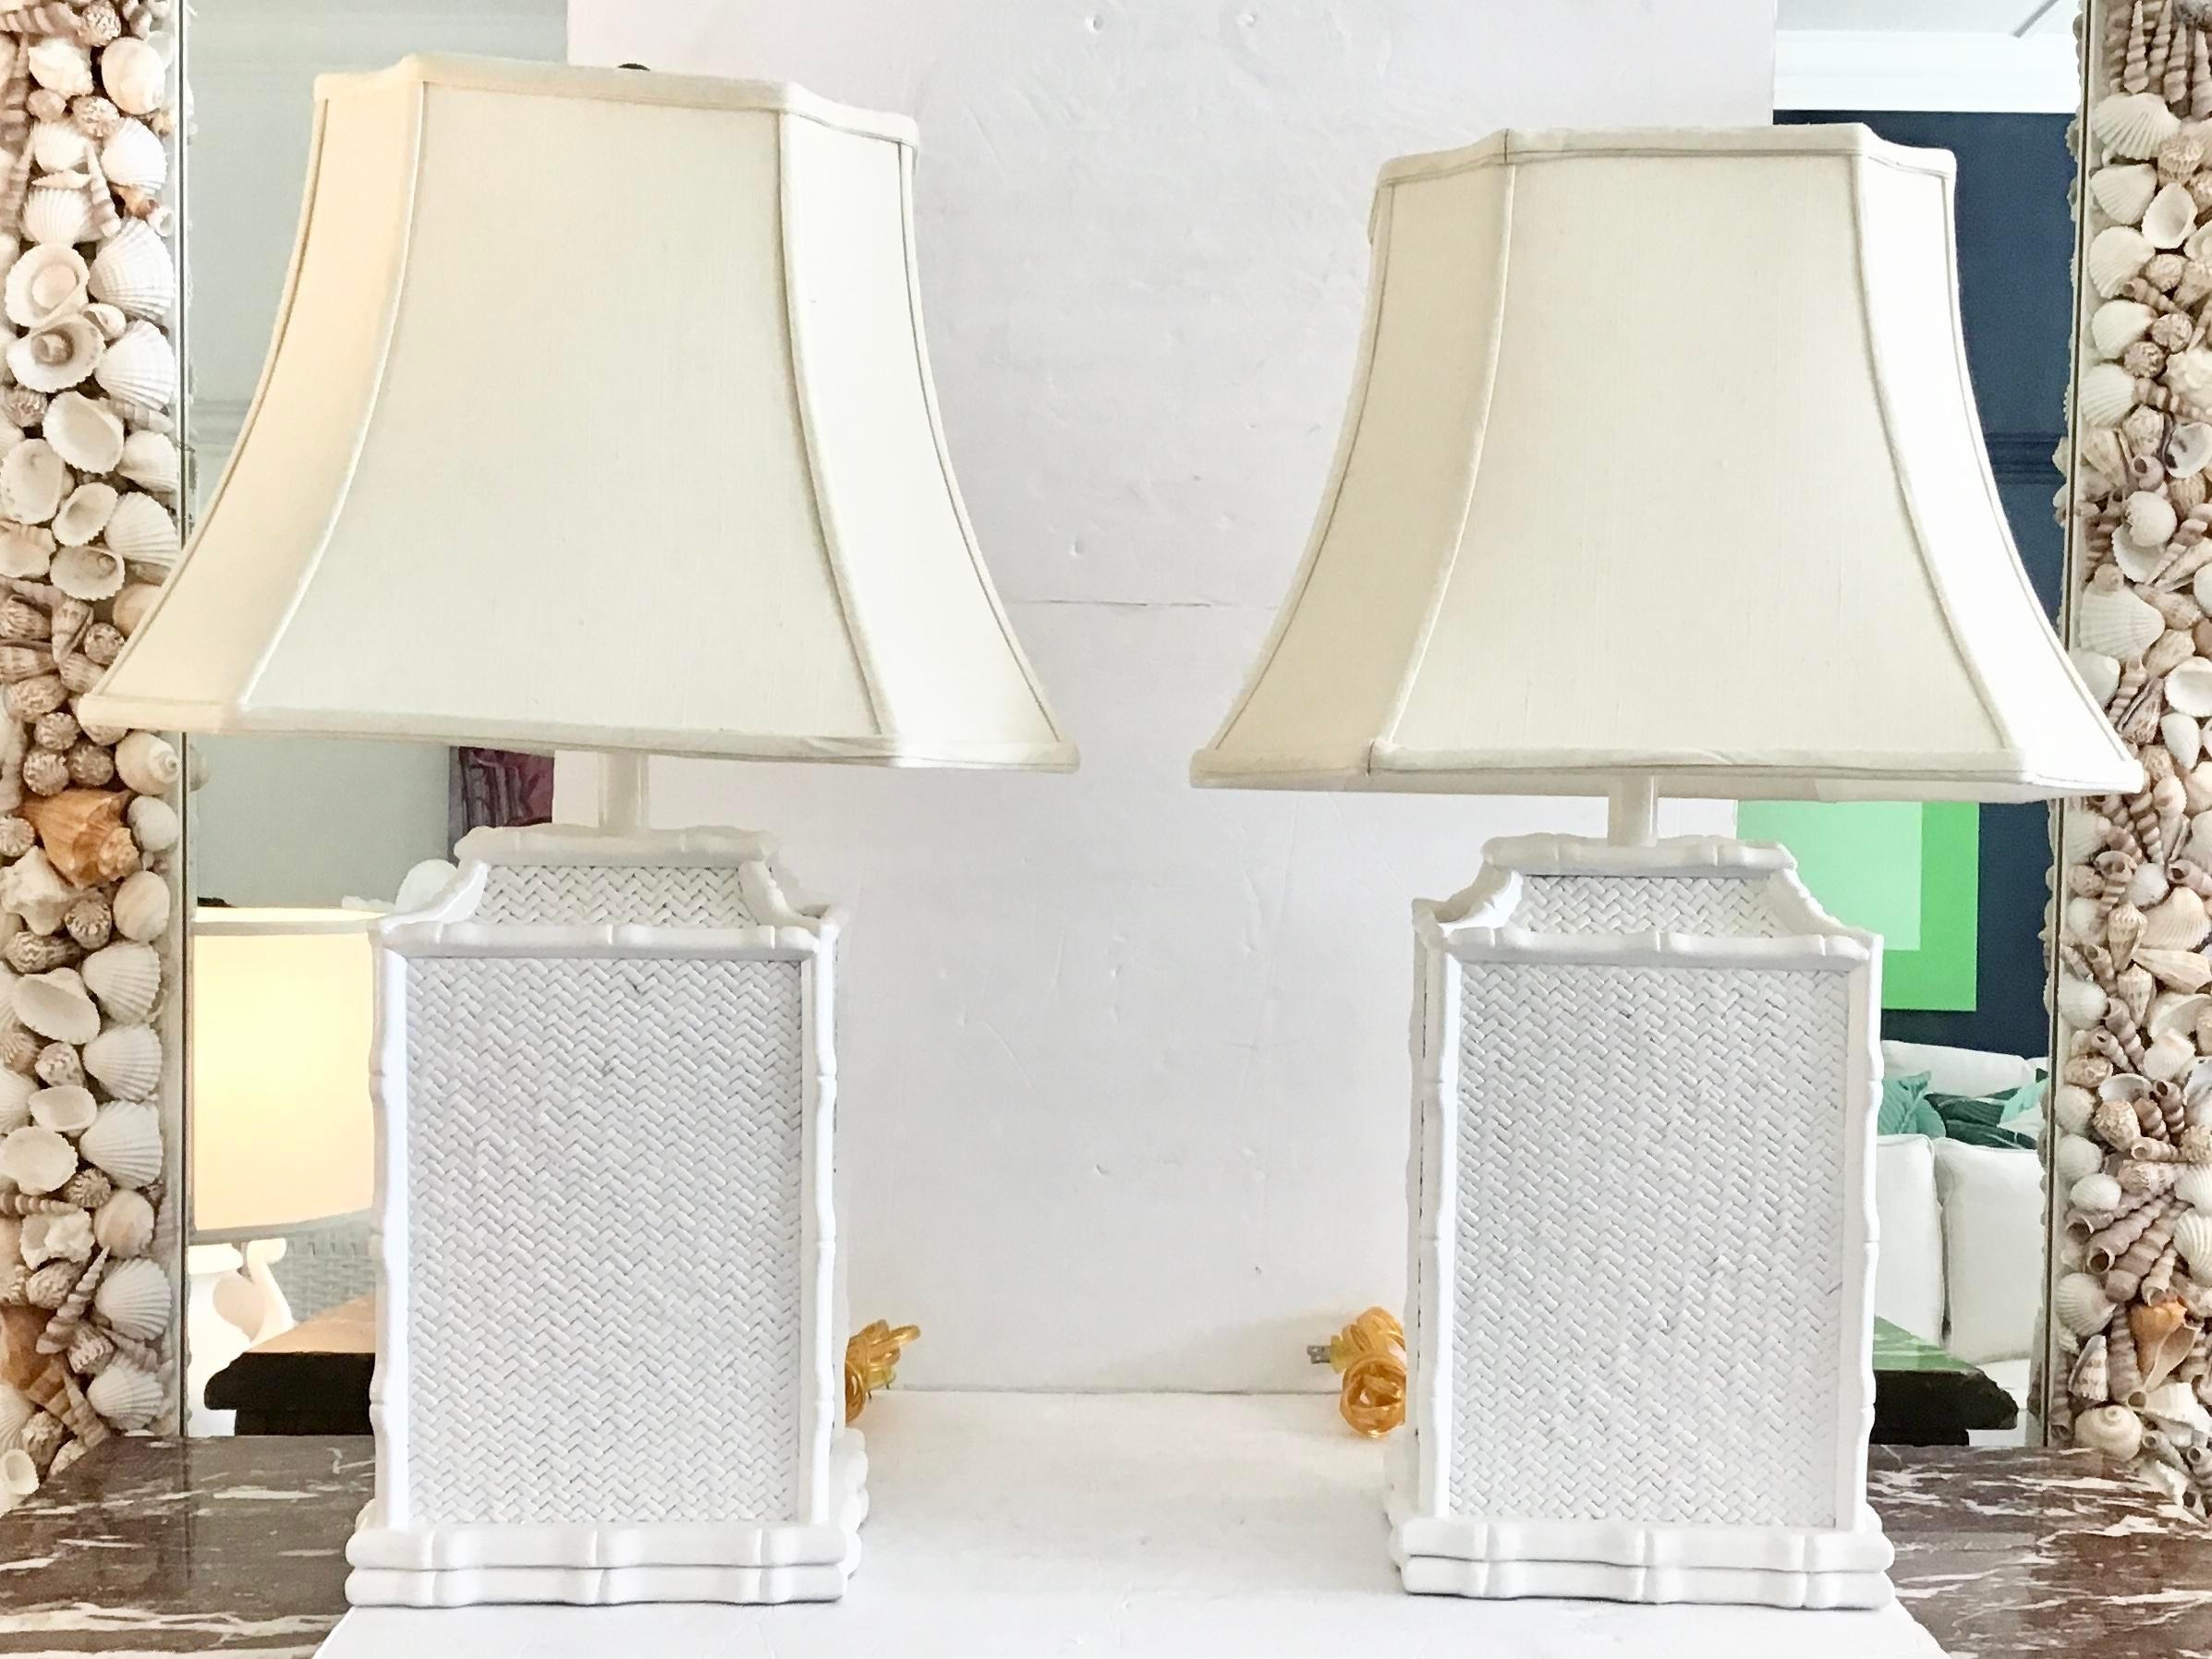 Beautiful pair of boho chic pagoda bamboo table lamps freshly lacquered in white. These lamps include shades. Great addition to your boho chic inspired home interiors.